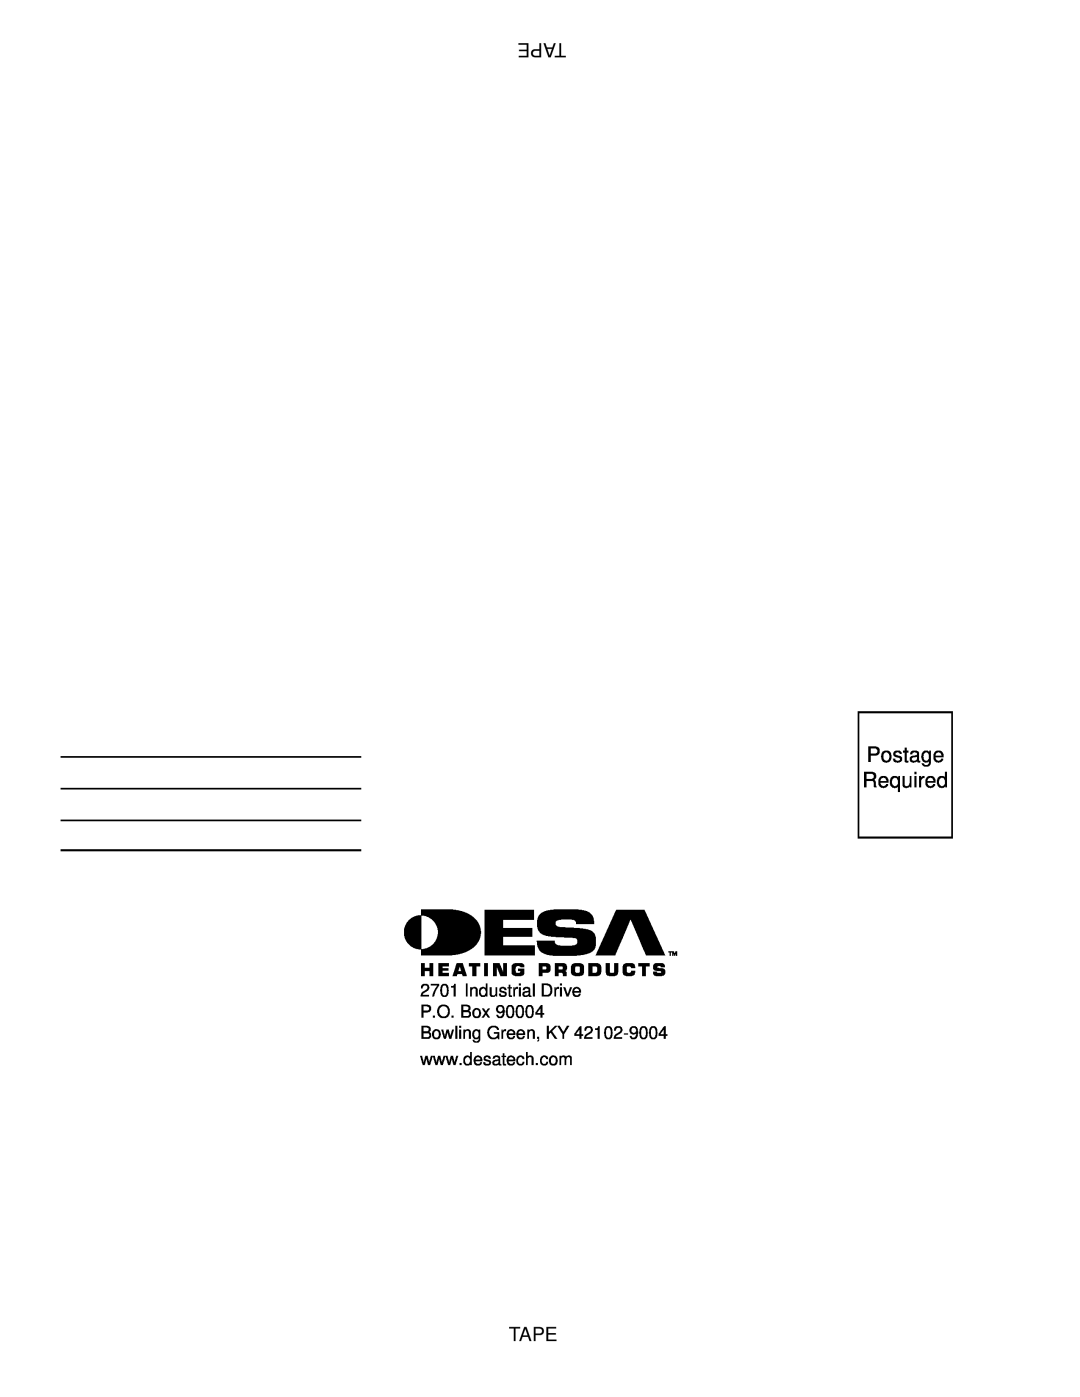 Desa TC25 owner manual Postage Required, Tape 